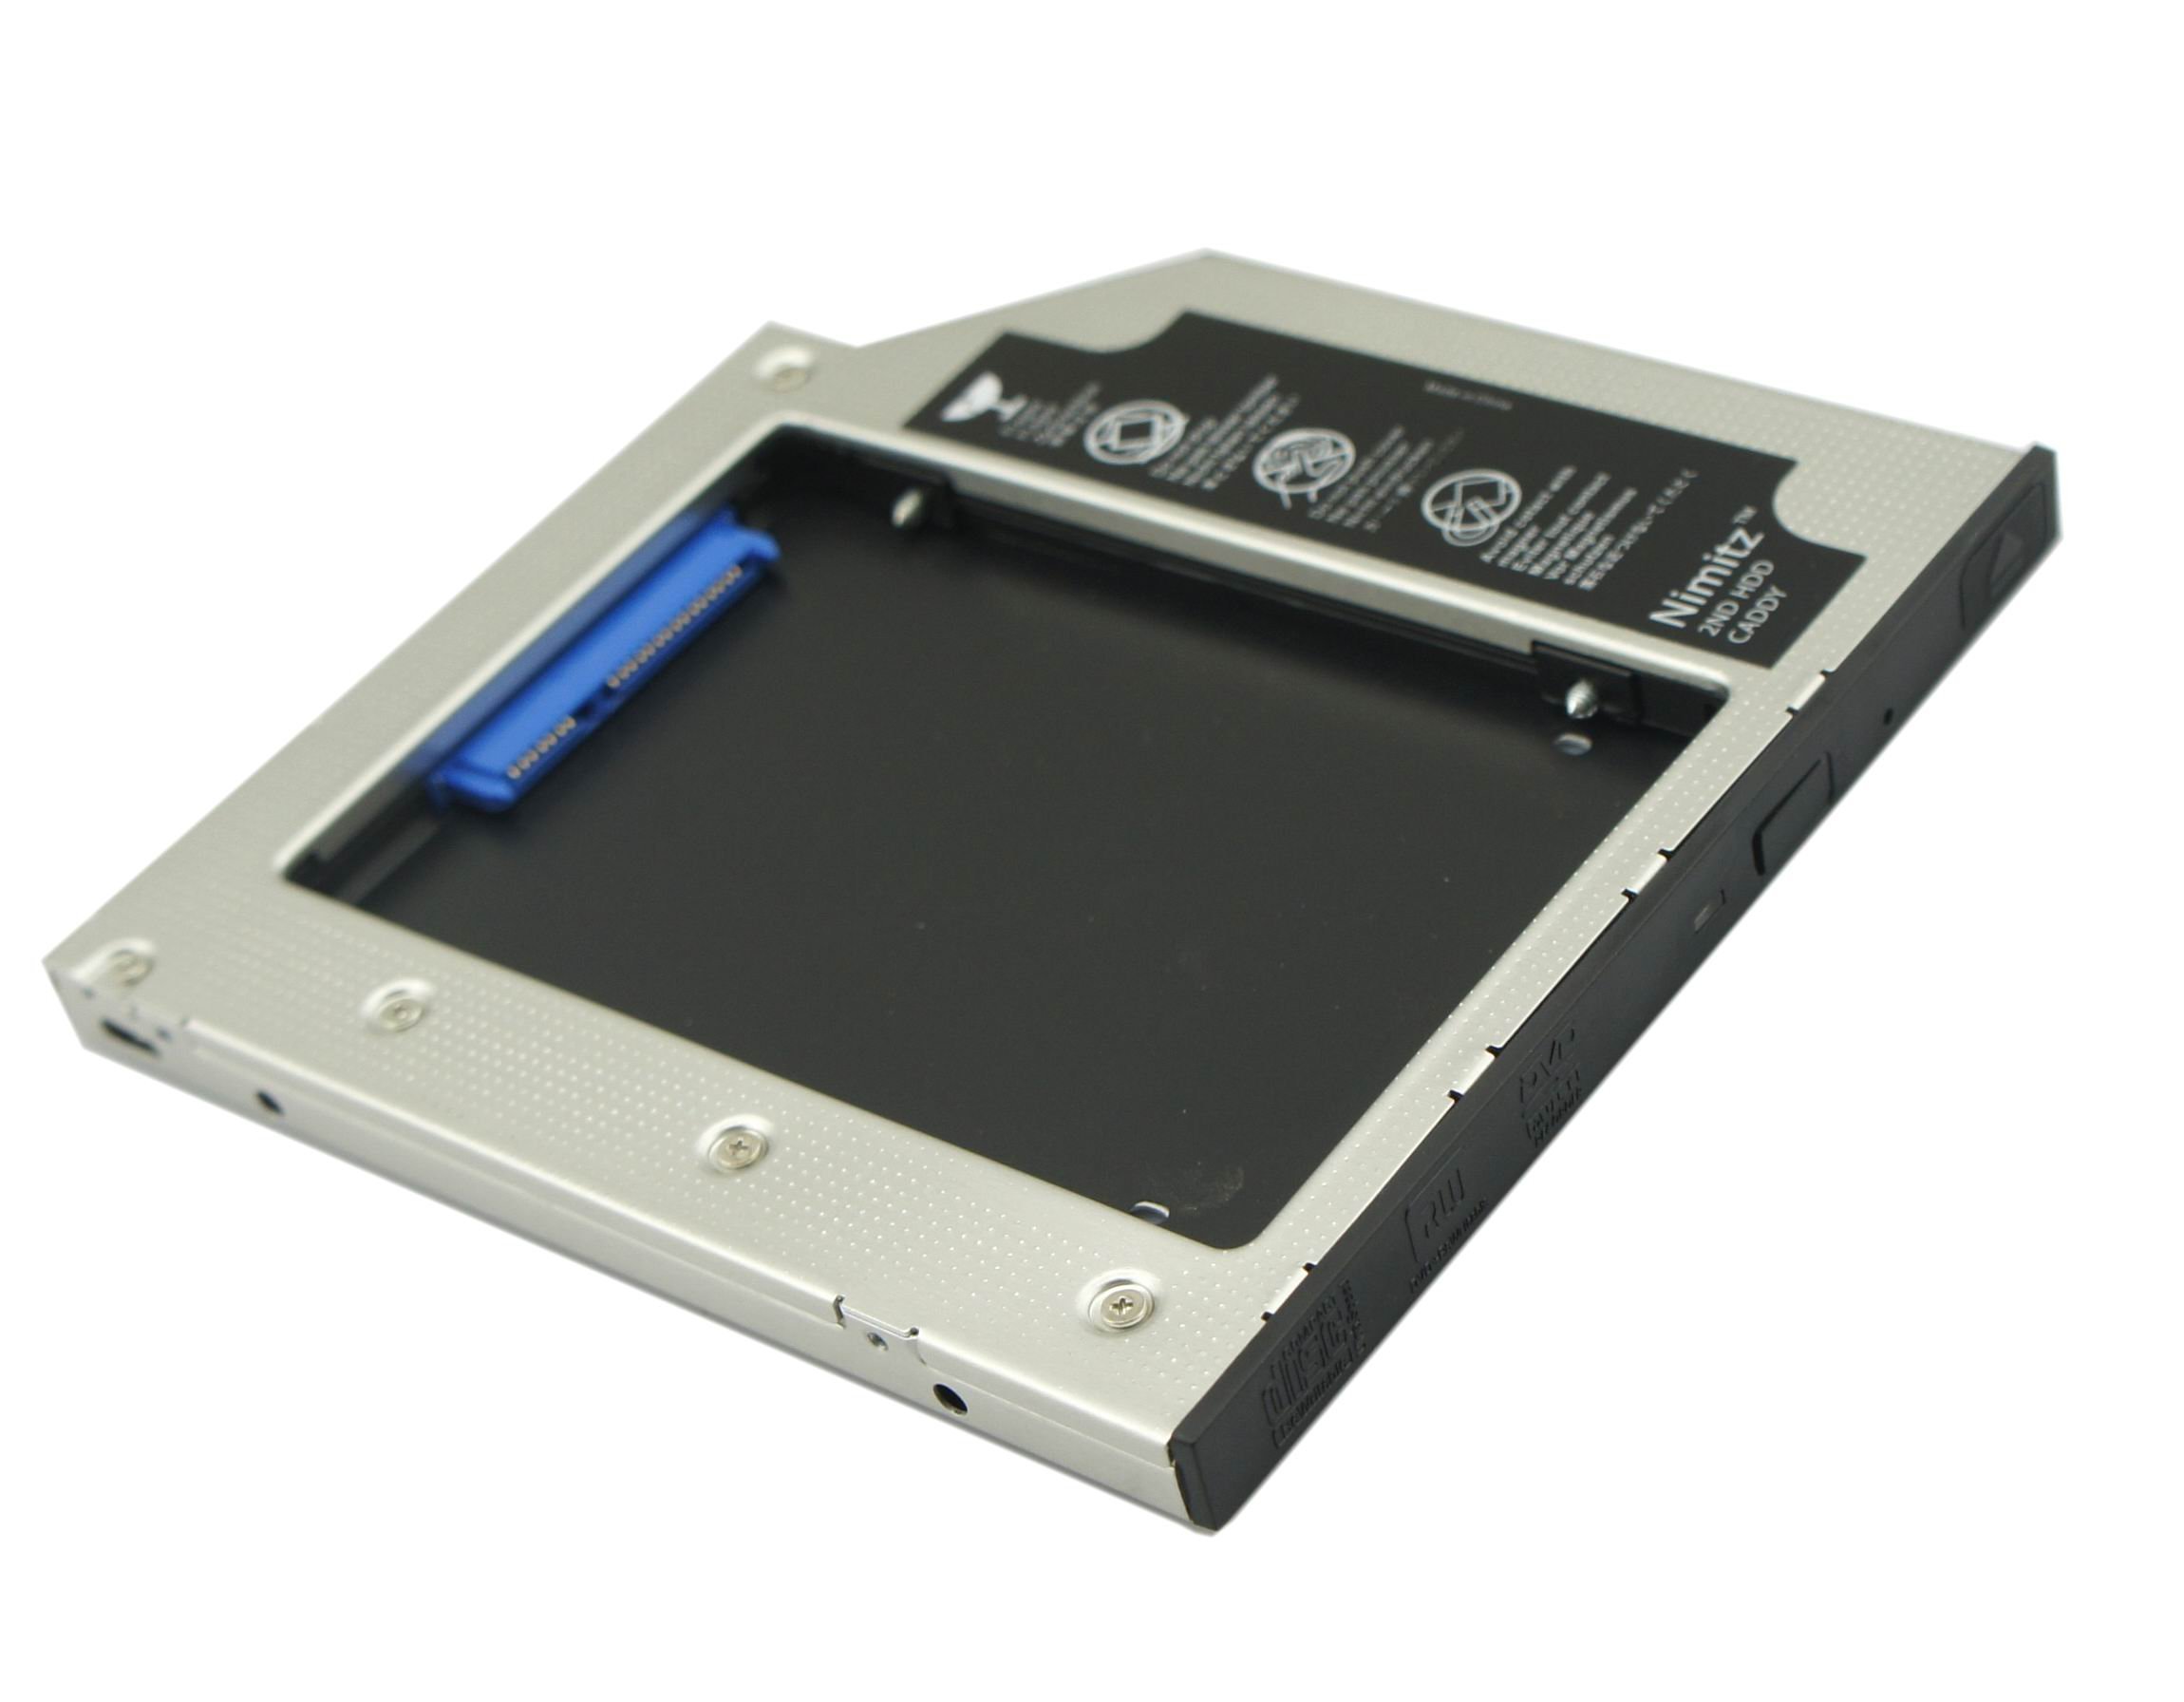 Book Cover Nimitz 2nd HDD SSD Hard Drive Caddy for Dell Precision M4600 M4700 M4800 M6400 M6500 M6600 M6700 M6800